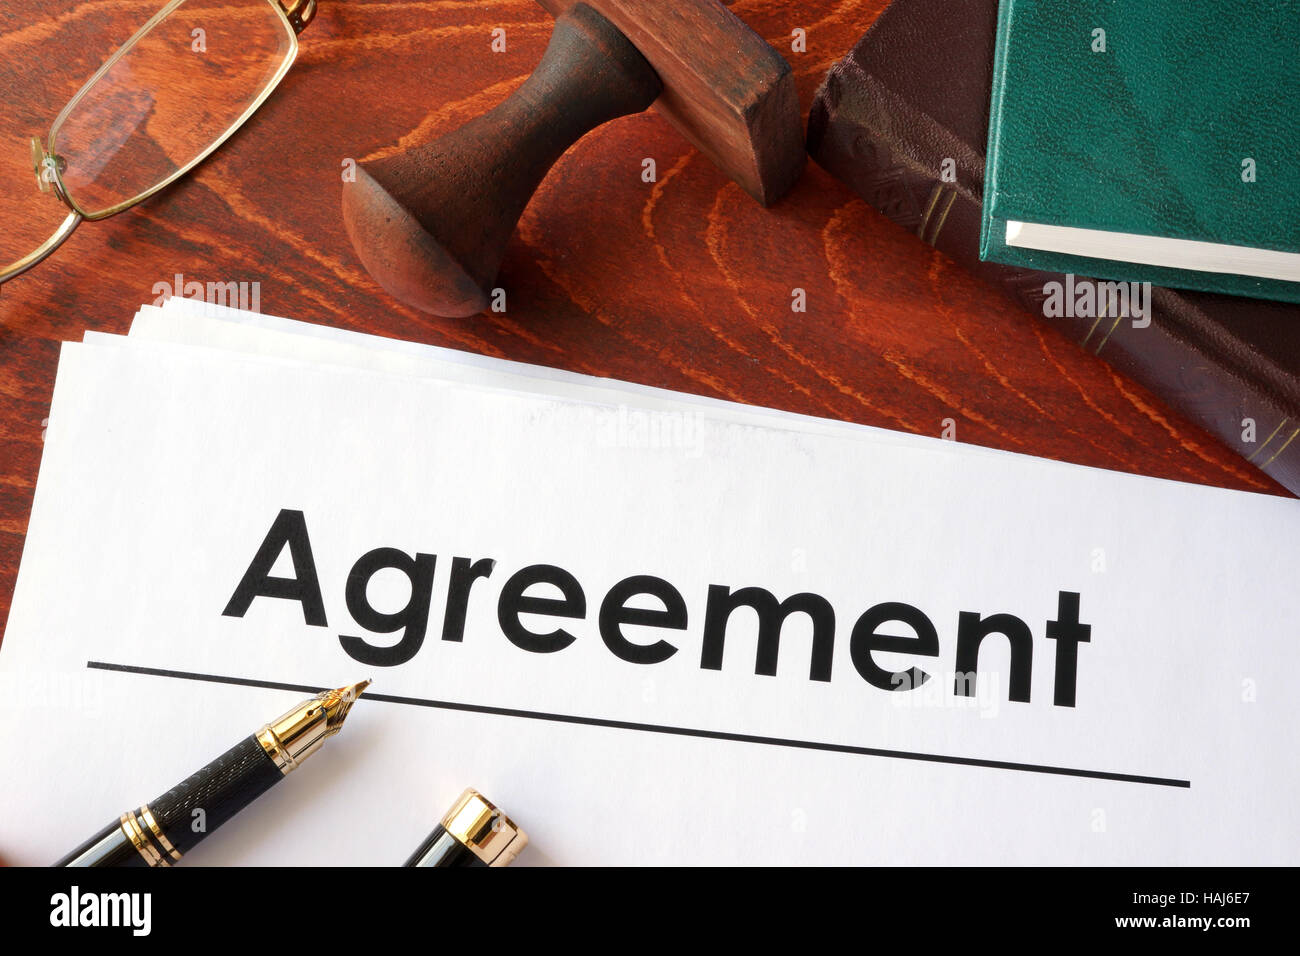 Agreement form on an office table. Stock Photo